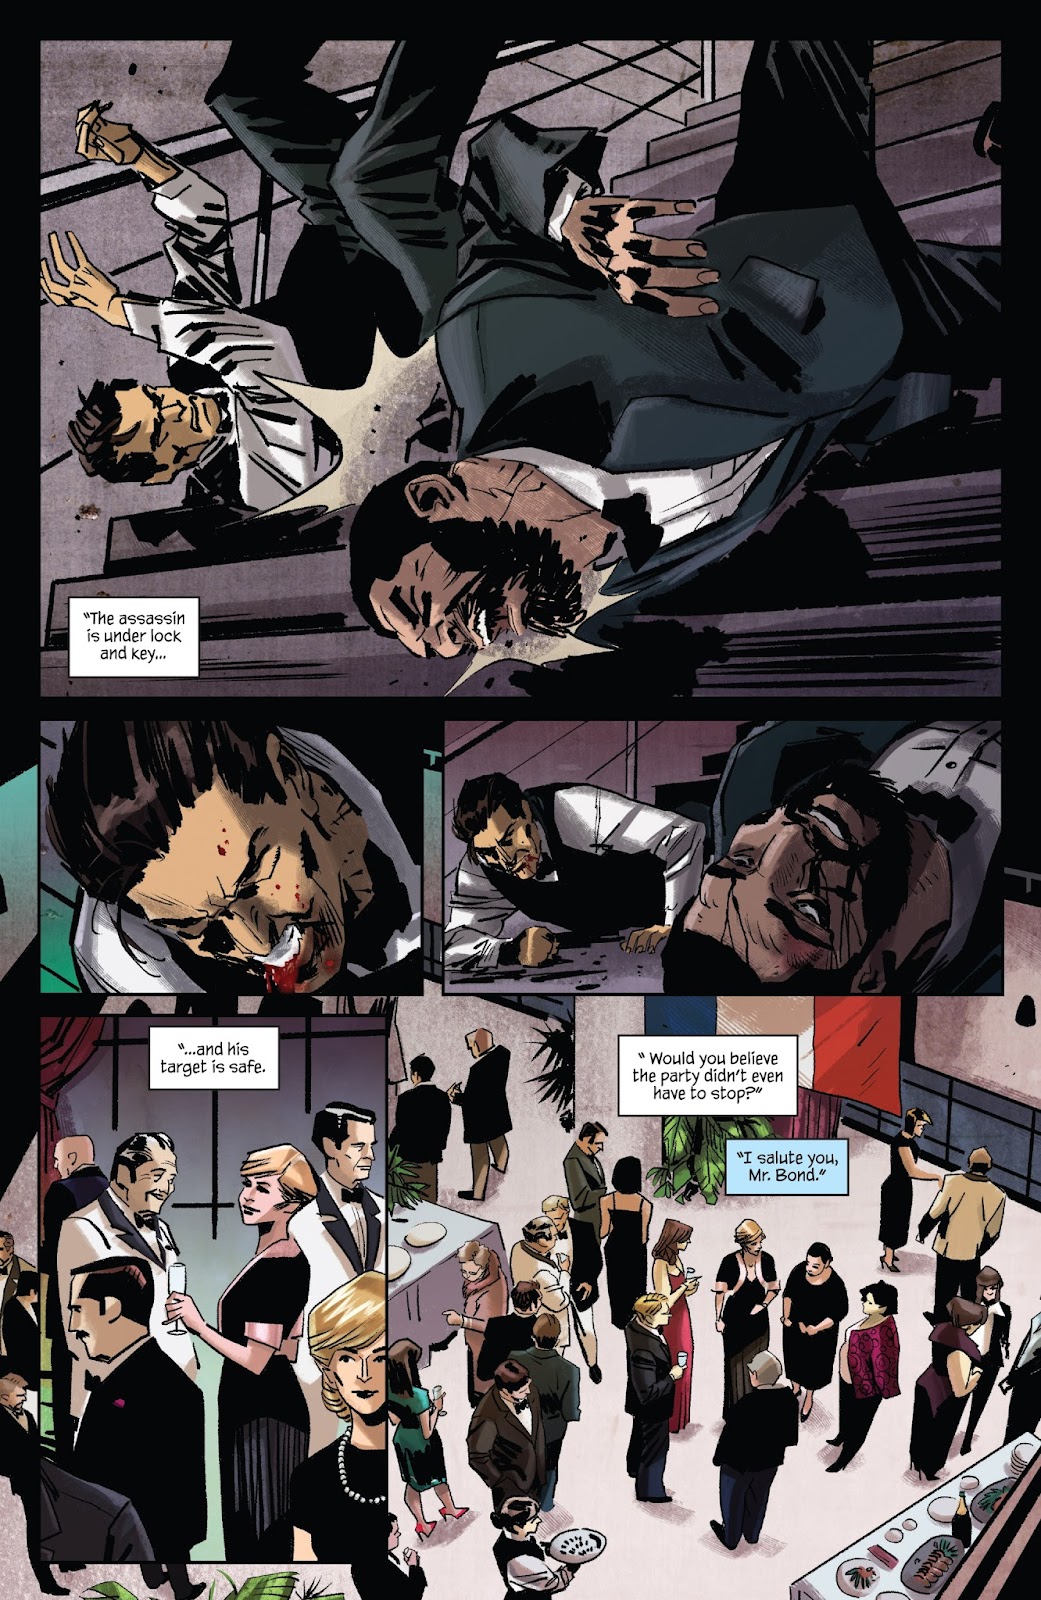 James Bond: The Body issue 1 - Page 18